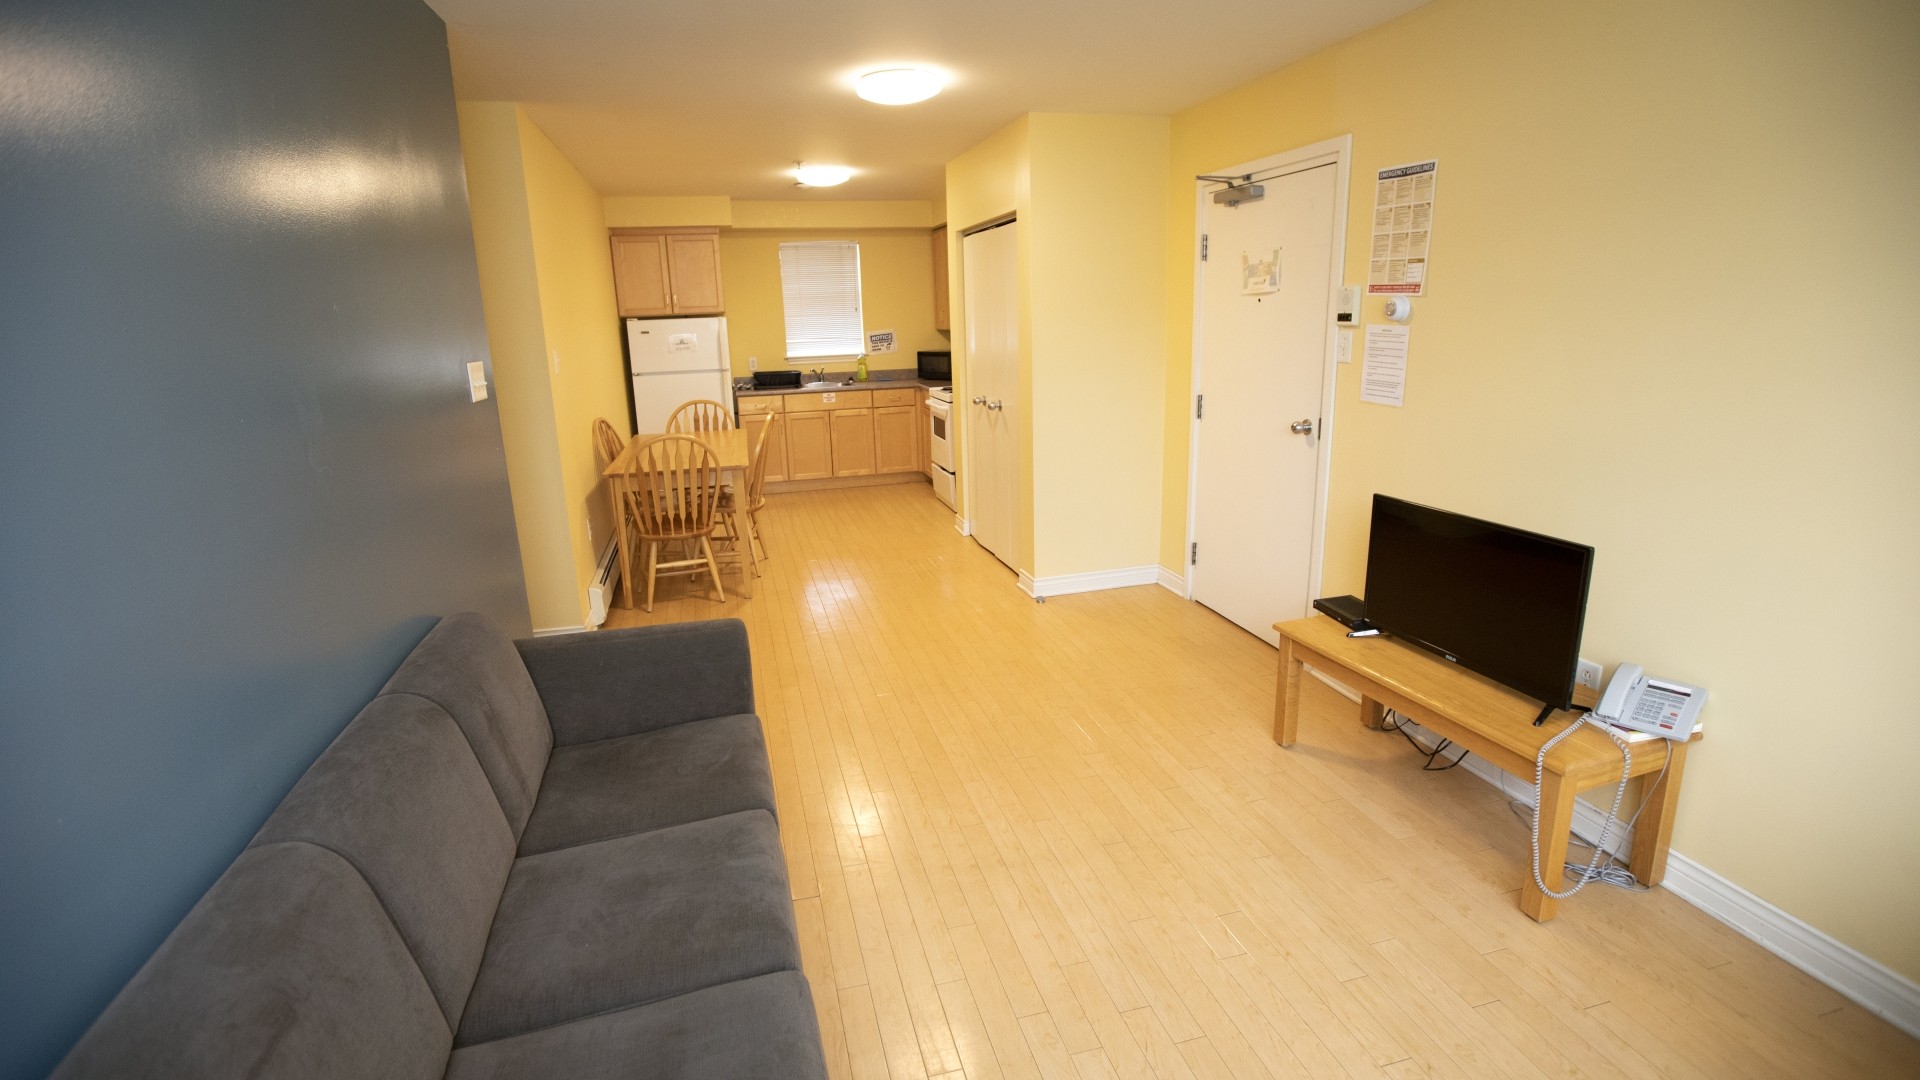 Apartment style room located in Power and Somers Hall. Includes a kitchen, dining table and living room.